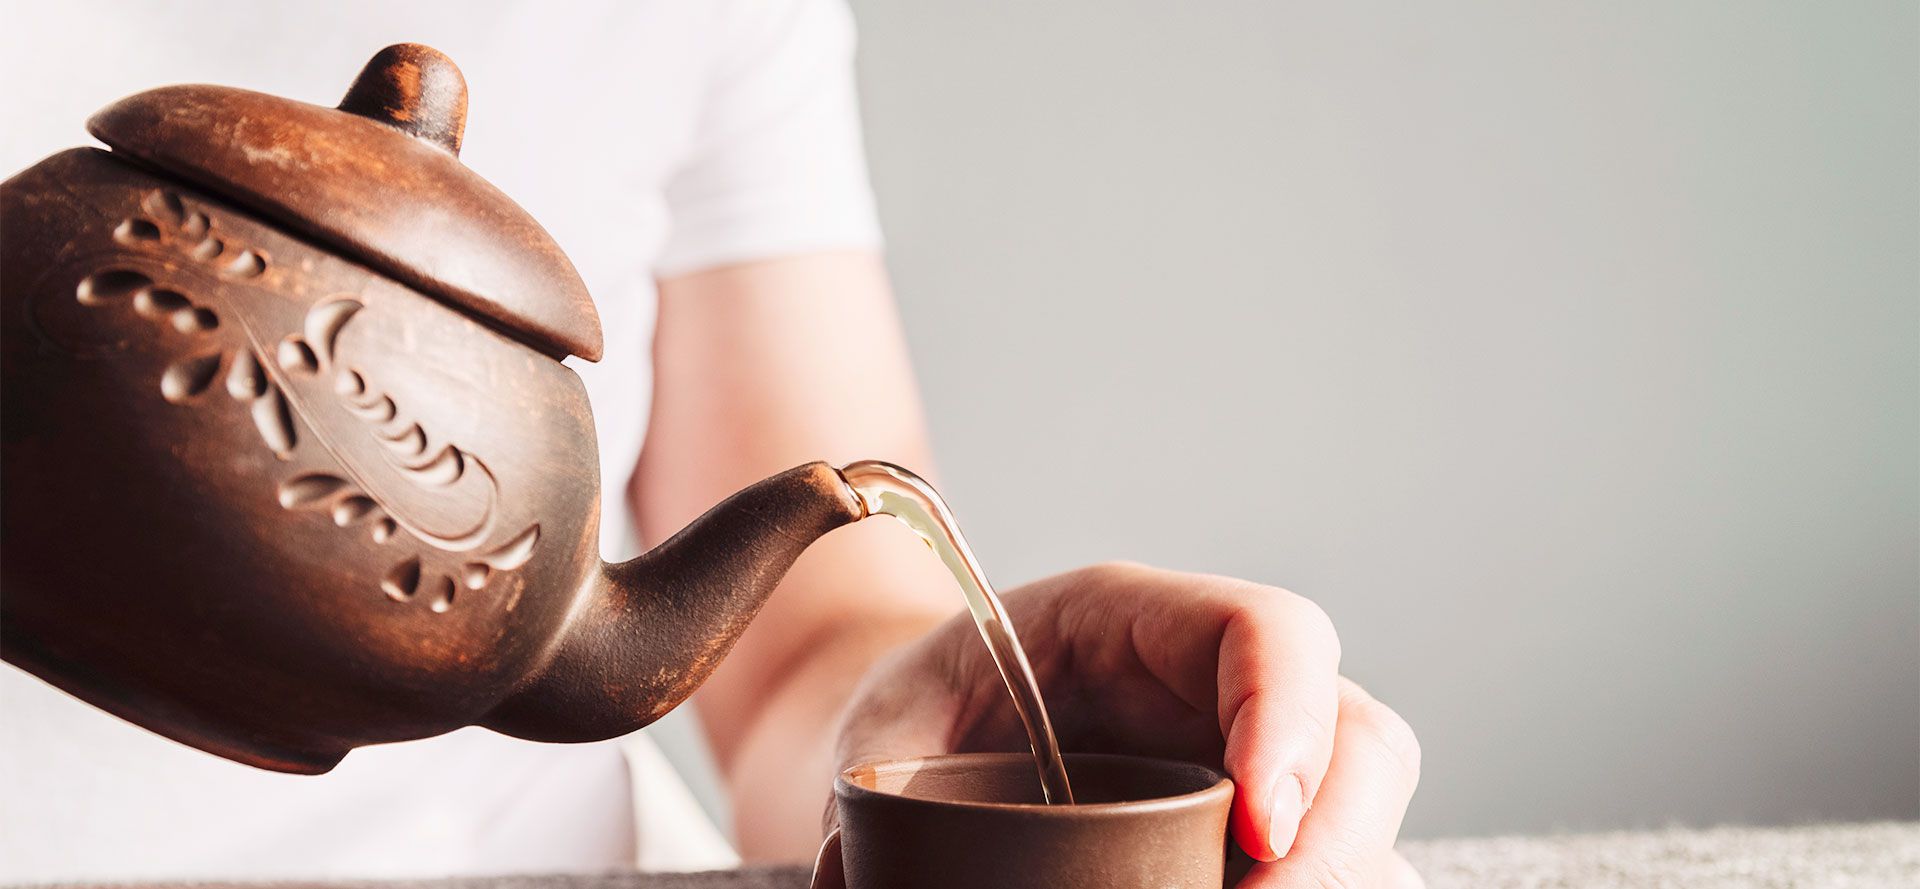 Pouring Tea From A Clay Teapot.